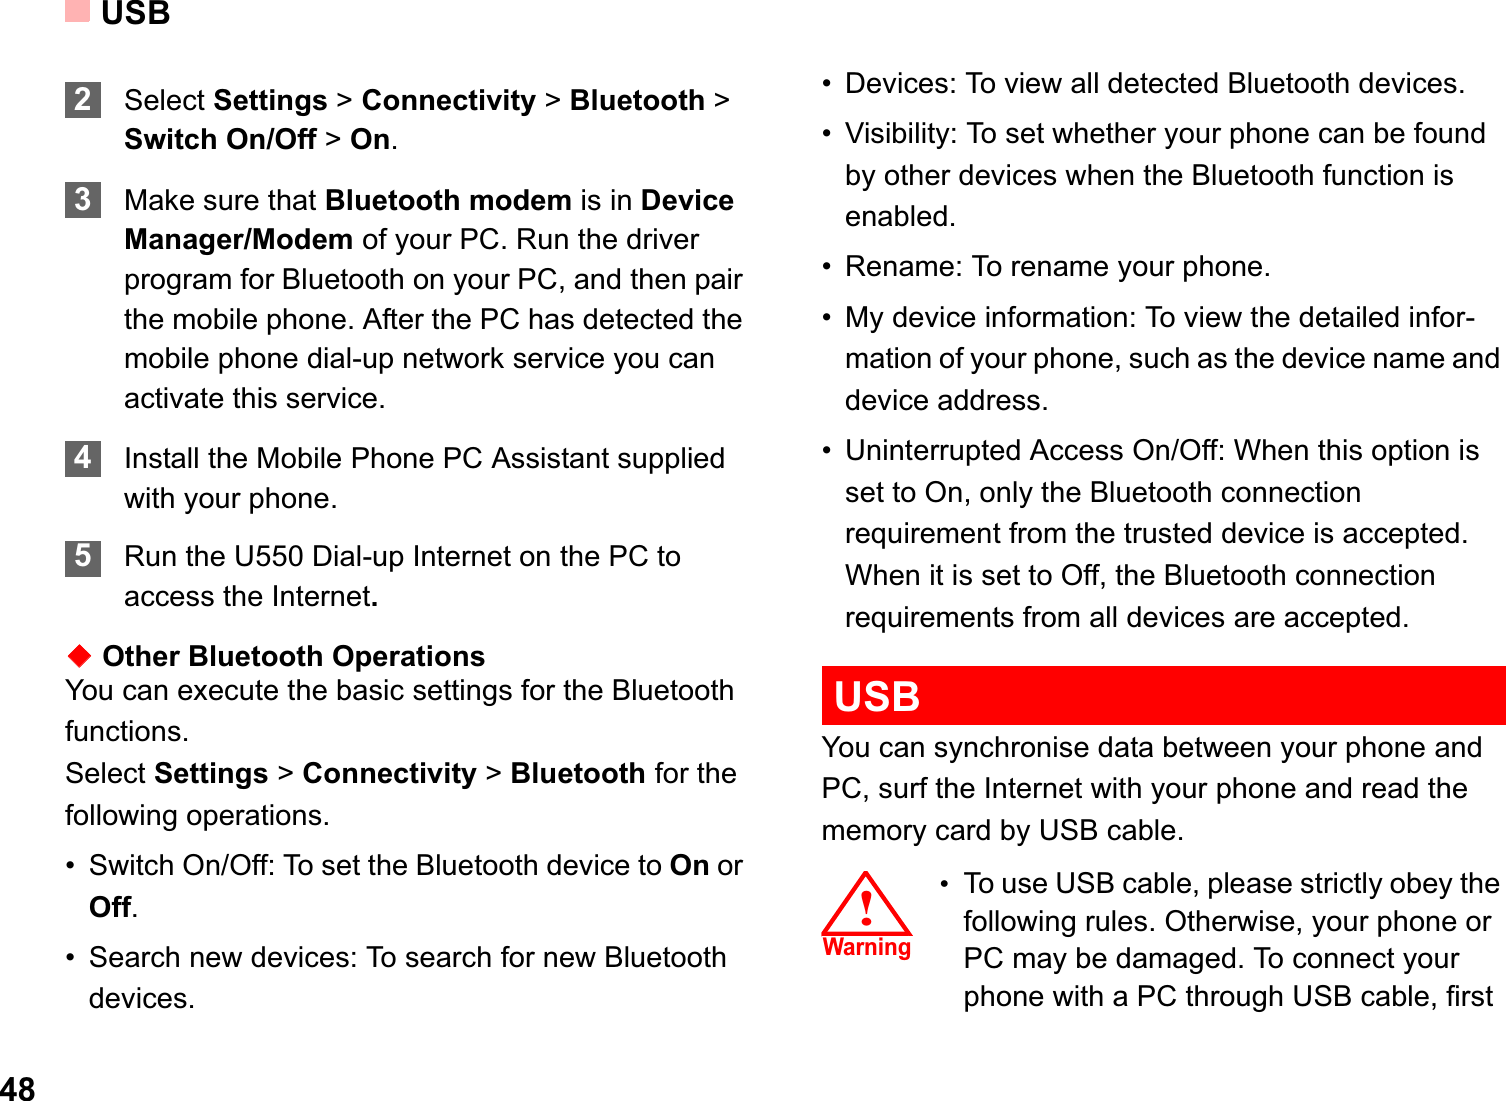 USB482Select Settings &gt; Connectivity &gt; Bluetooth &gt; Switch On/Off &gt; On.3Make sure that Bluetooth modem is in Device Manager/Modem of your PC. Run the driver program for Bluetooth on your PC, and then pair the mobile phone. After the PC has detected the mobile phone dial-up network service you can activate this service.4Install the Mobile Phone PC Assistant supplied with your phone. 5Run the U550 Dial-up Internet on the PC to access the Internet.ƹOther Bluetooth OperationsYou can execute the basic settings for the Bluetooth functions.Select Settings &gt; Connectivity &gt; Bluetooth for the following operations.• Switch On/Off: To set the Bluetooth device to On or Off.• Search new devices: To search for new Bluetooth devices.• Devices: To view all detected Bluetooth devices.• Visibility: To set whether your phone can be found by other devices when the Bluetooth function is enabled.• Rename: To rename your phone.• My device information: To view the detailed infor-mation of your phone, such as the device name and device address.• Uninterrupted Access On/Off: When this option is set to On, only the Bluetooth connection requirement from the trusted device is accepted. When it is set to Off, the Bluetooth connection requirements from all devices are accepted.USBYou can synchronise data between your phone and PC, surf the Internet with your phone and read the memory card by USB cable.!䄺ਞ!Warning•To use USB cable, please strictly obey the following rules. Otherwise, your phone or PC may be damaged. To connect your phone with a PC through USB cable, first 